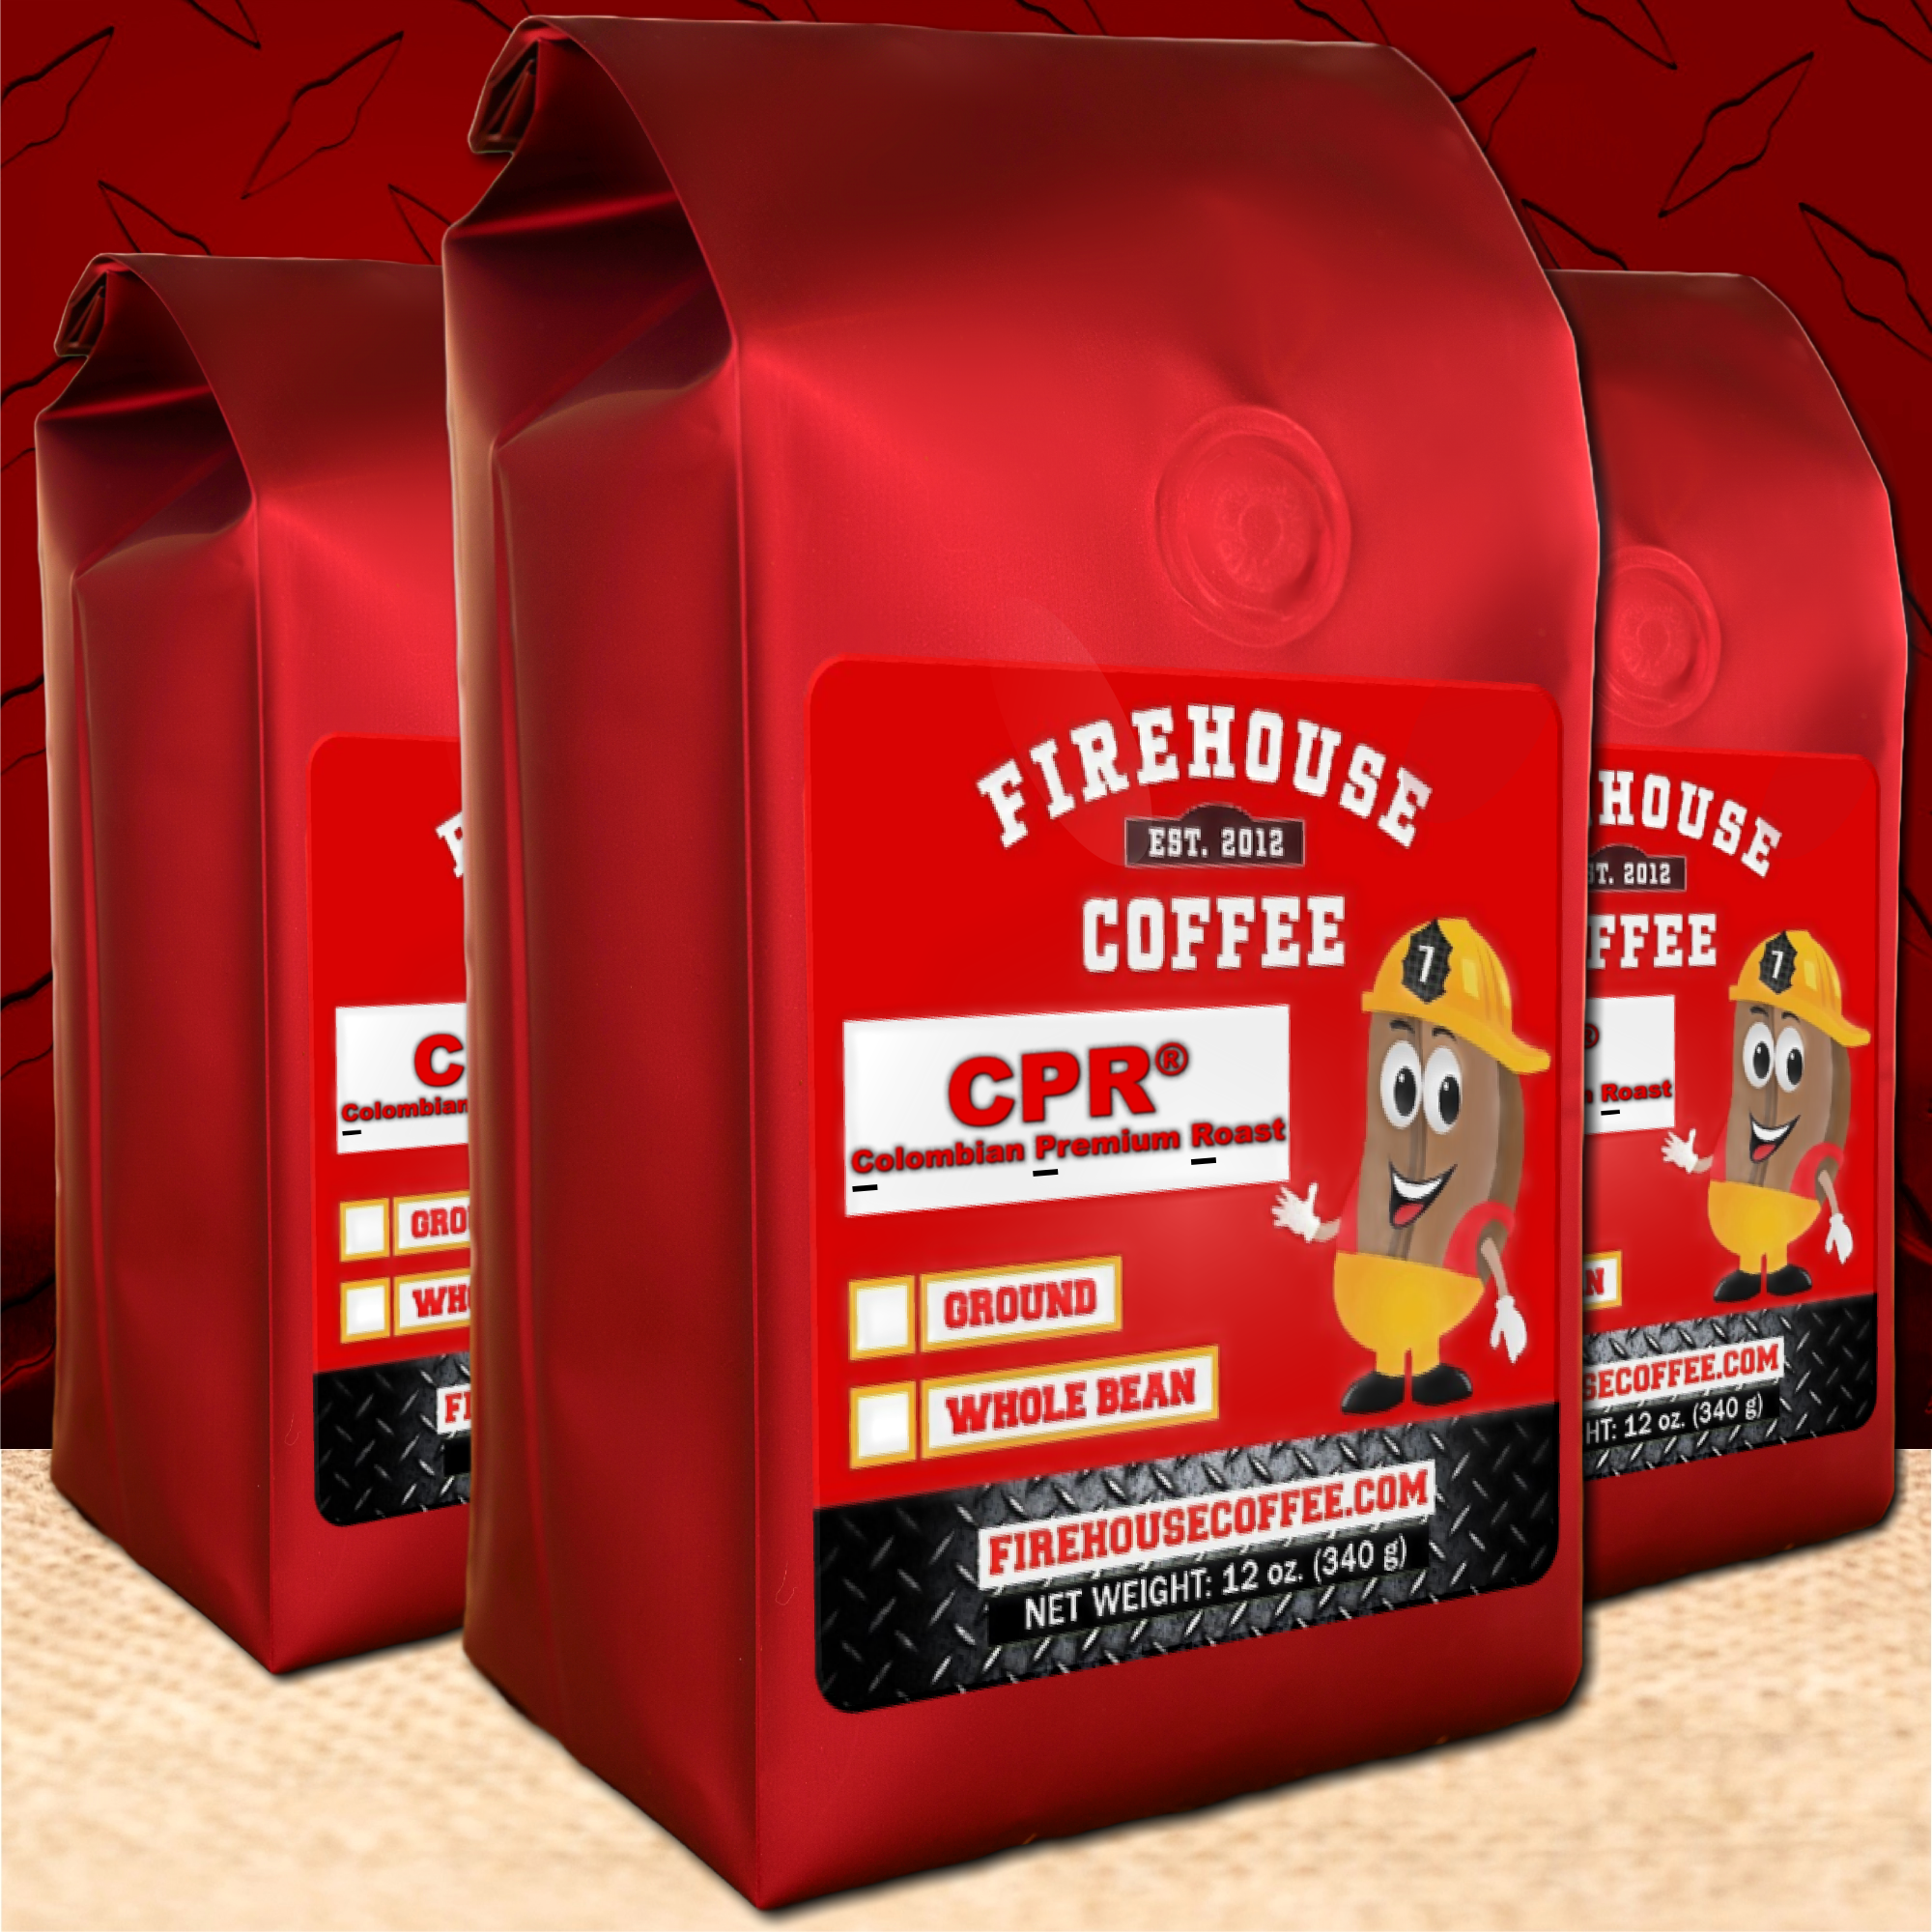 12 oz bags of Colombian Coffee